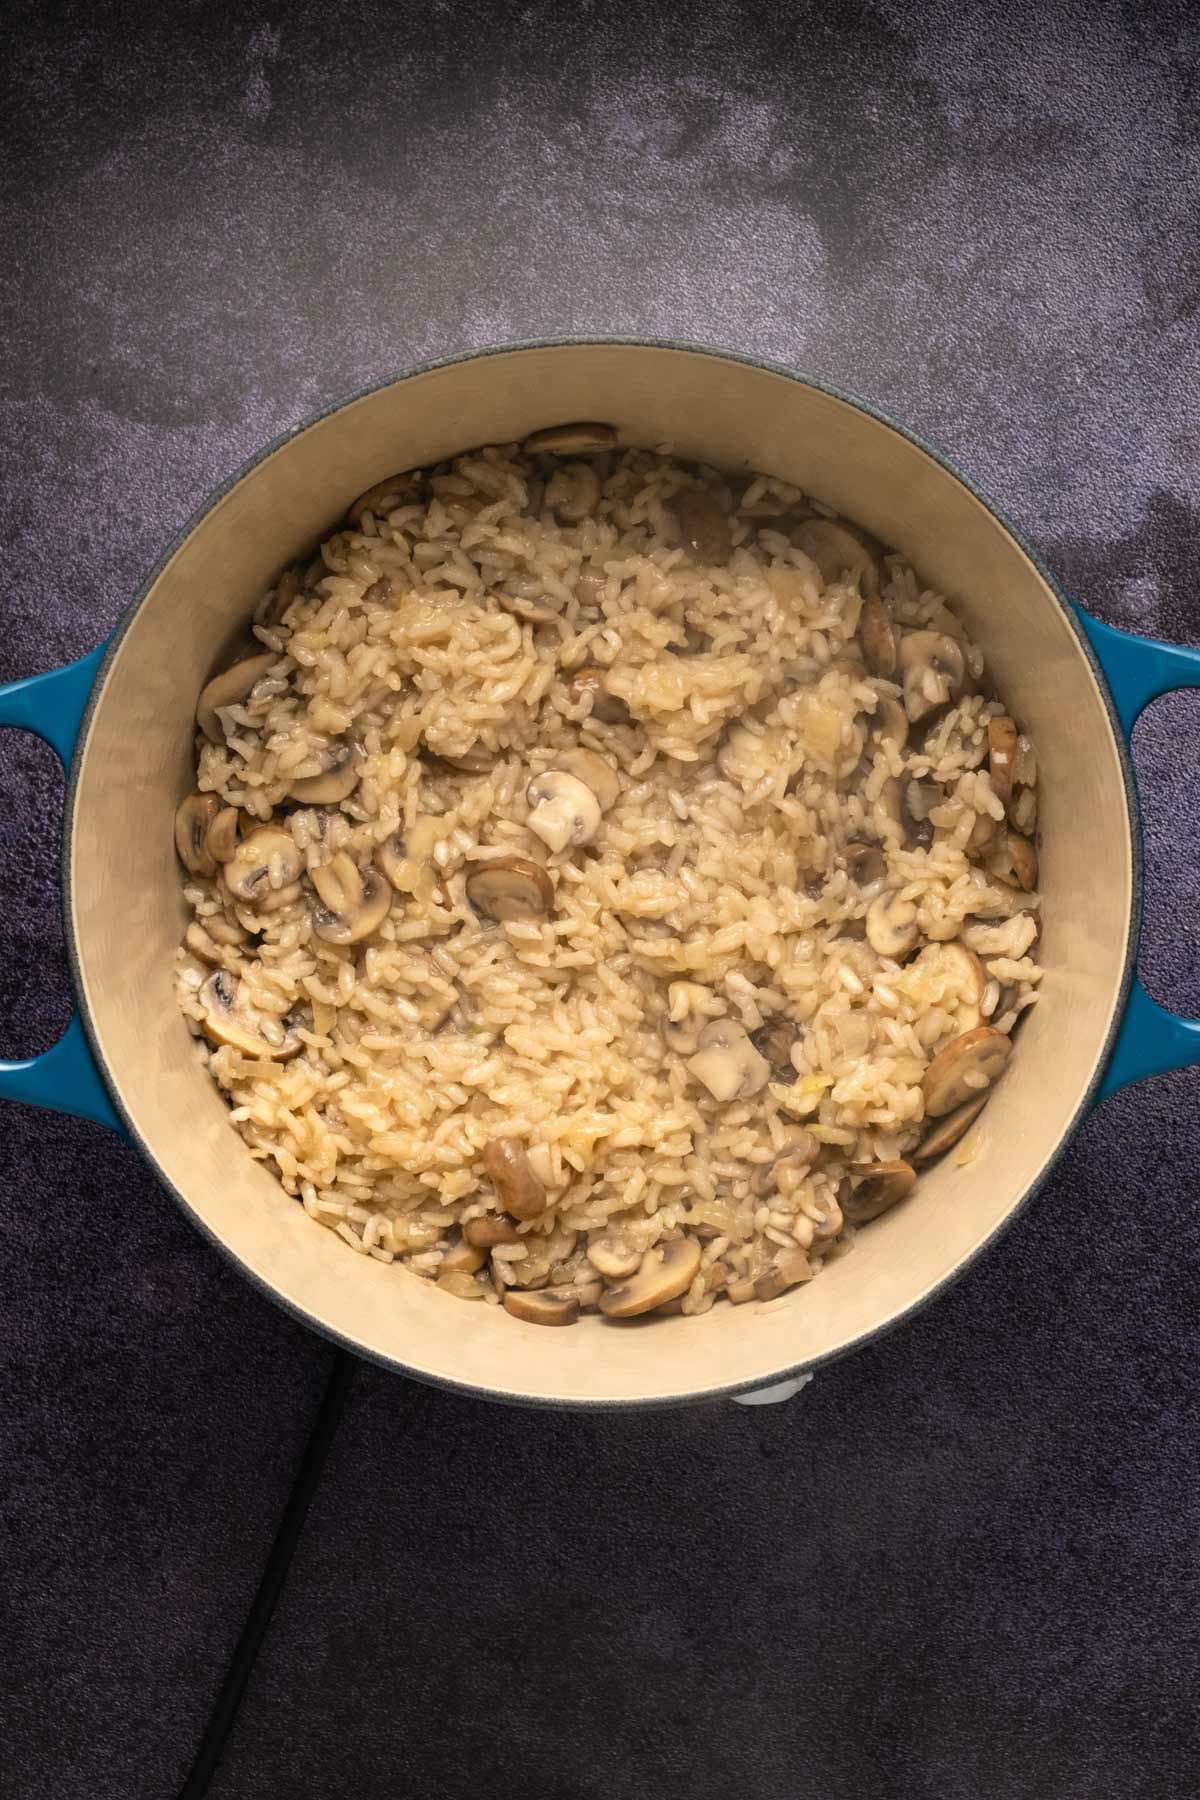 Mushroom risotto cooking in a pot.